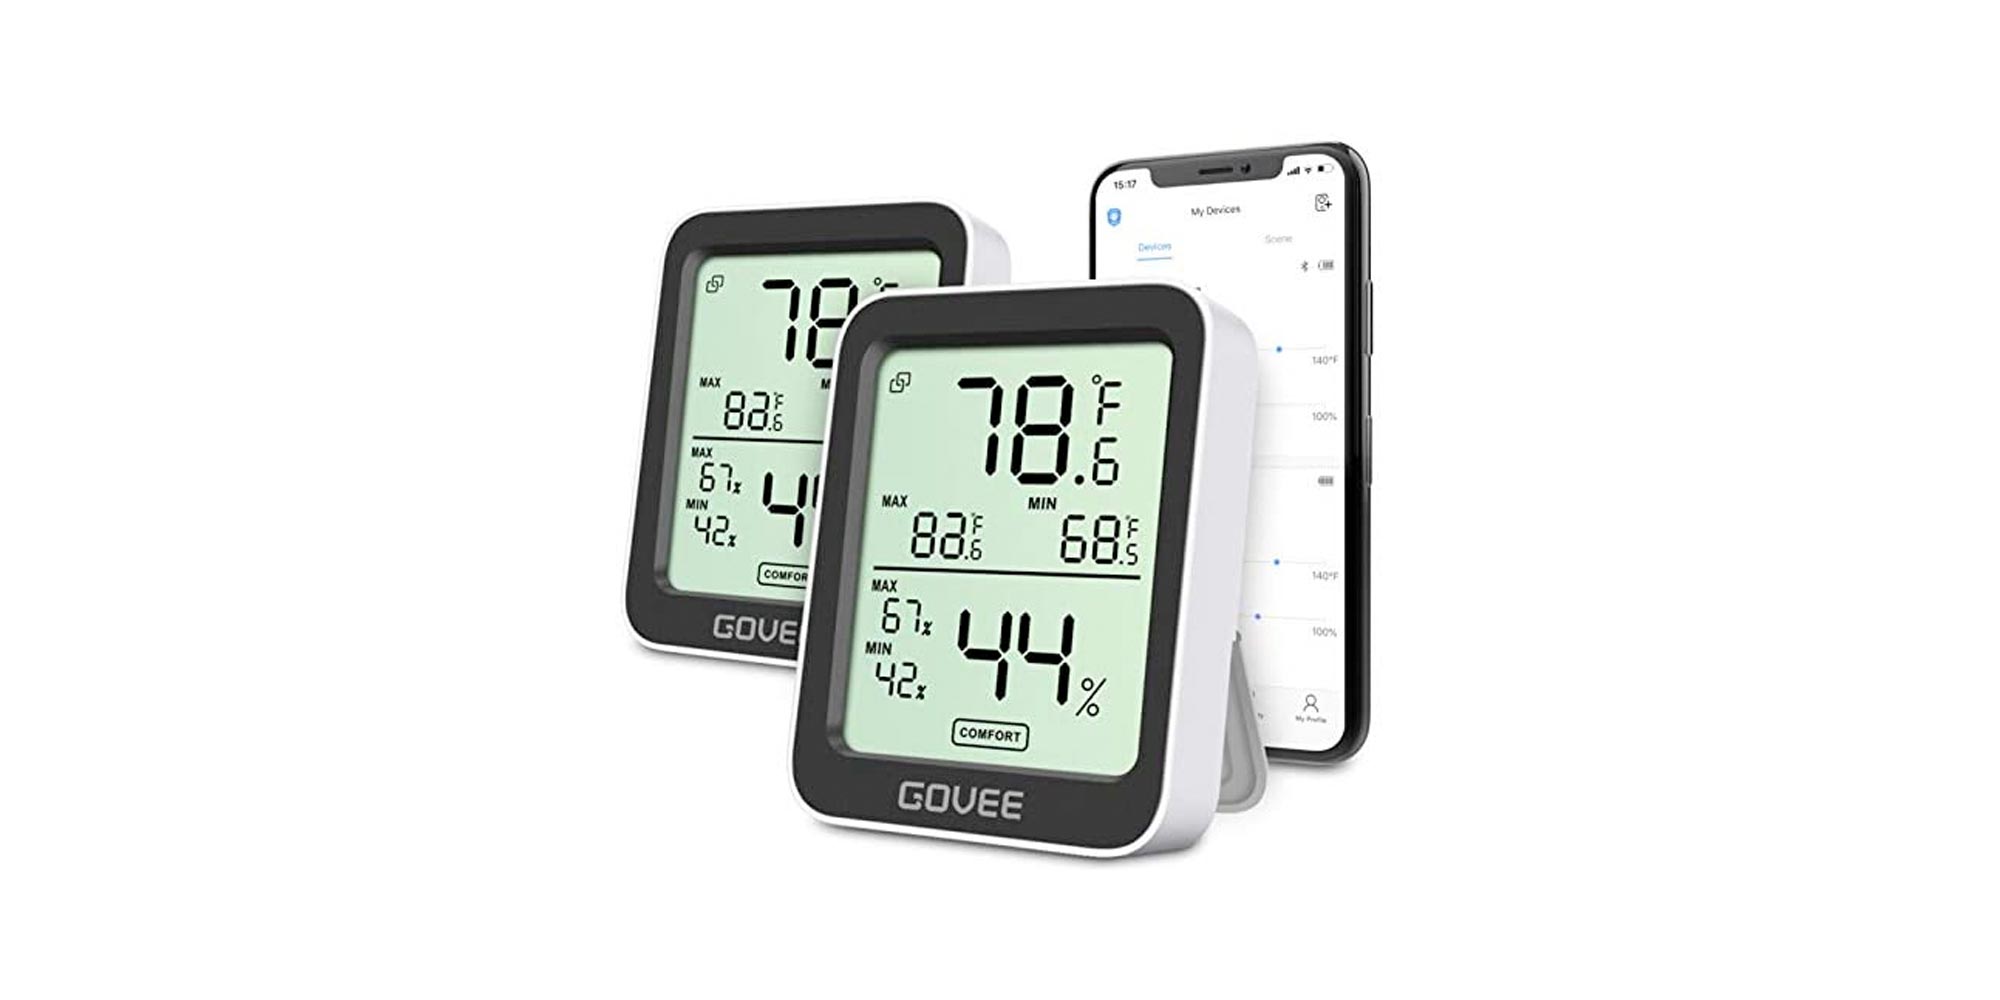 Govee's Bluetooth-enabled wireless thermometer/hygrometer drops to $11